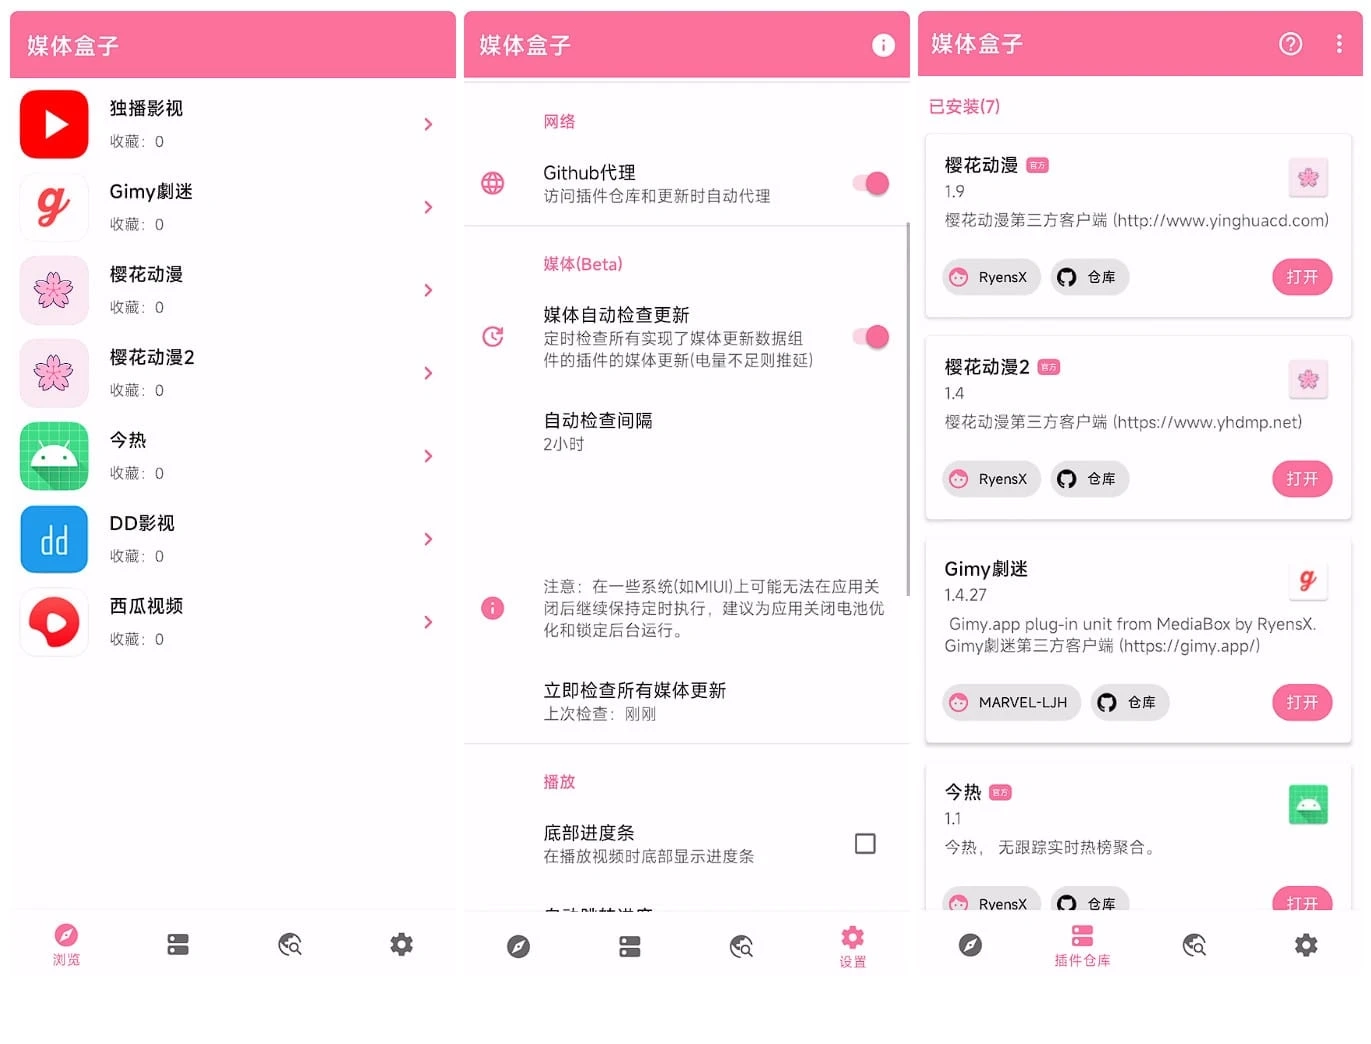 Android 媒体盒子 v2.55